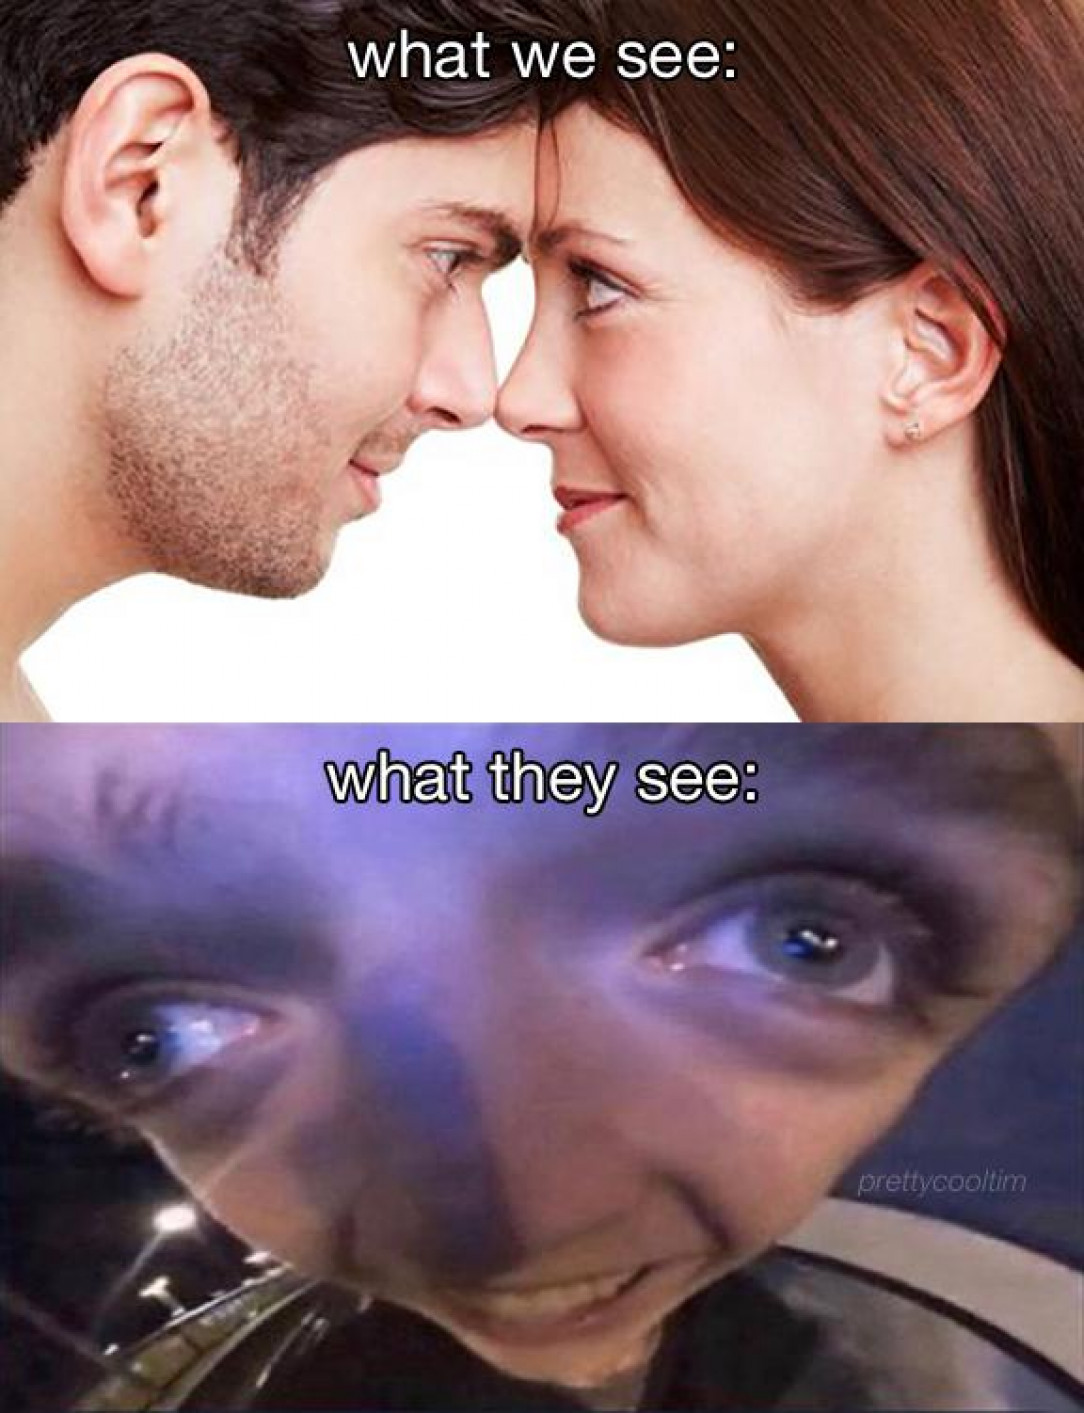 What they see